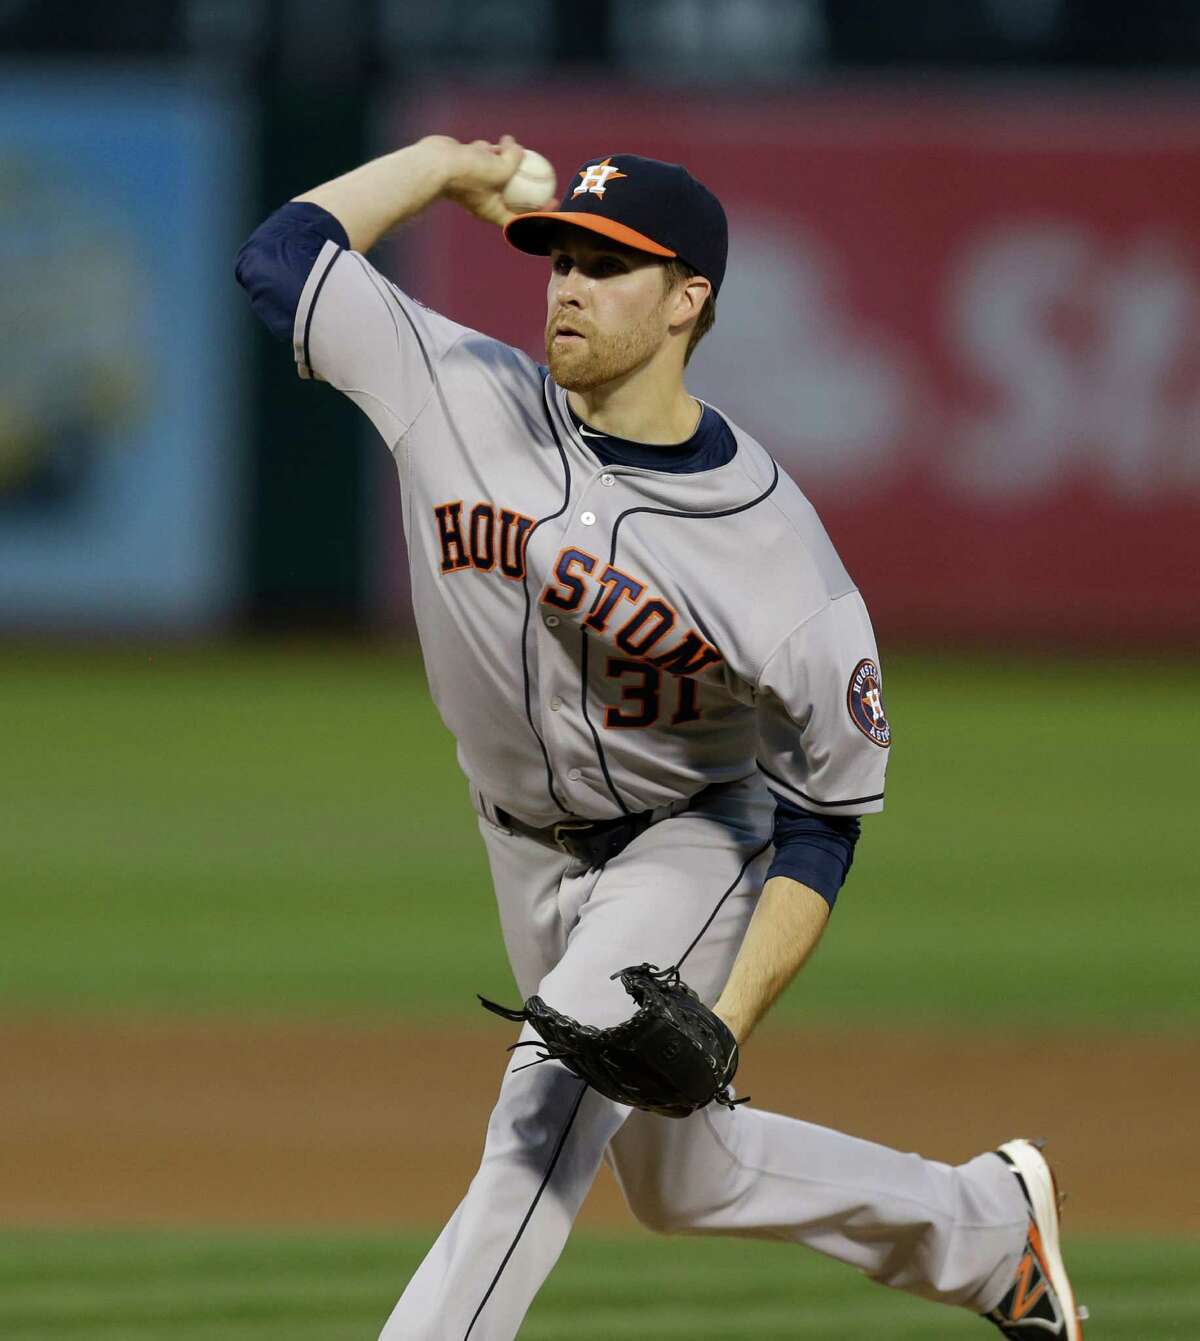 Houston Astros pitcher Collin McHugh works against the Oakland Athletics in the first inning of a baseball game Wednesday, Sept. 9, 2015, in Oakland, Calif. (AP Photo/Ben Margot)